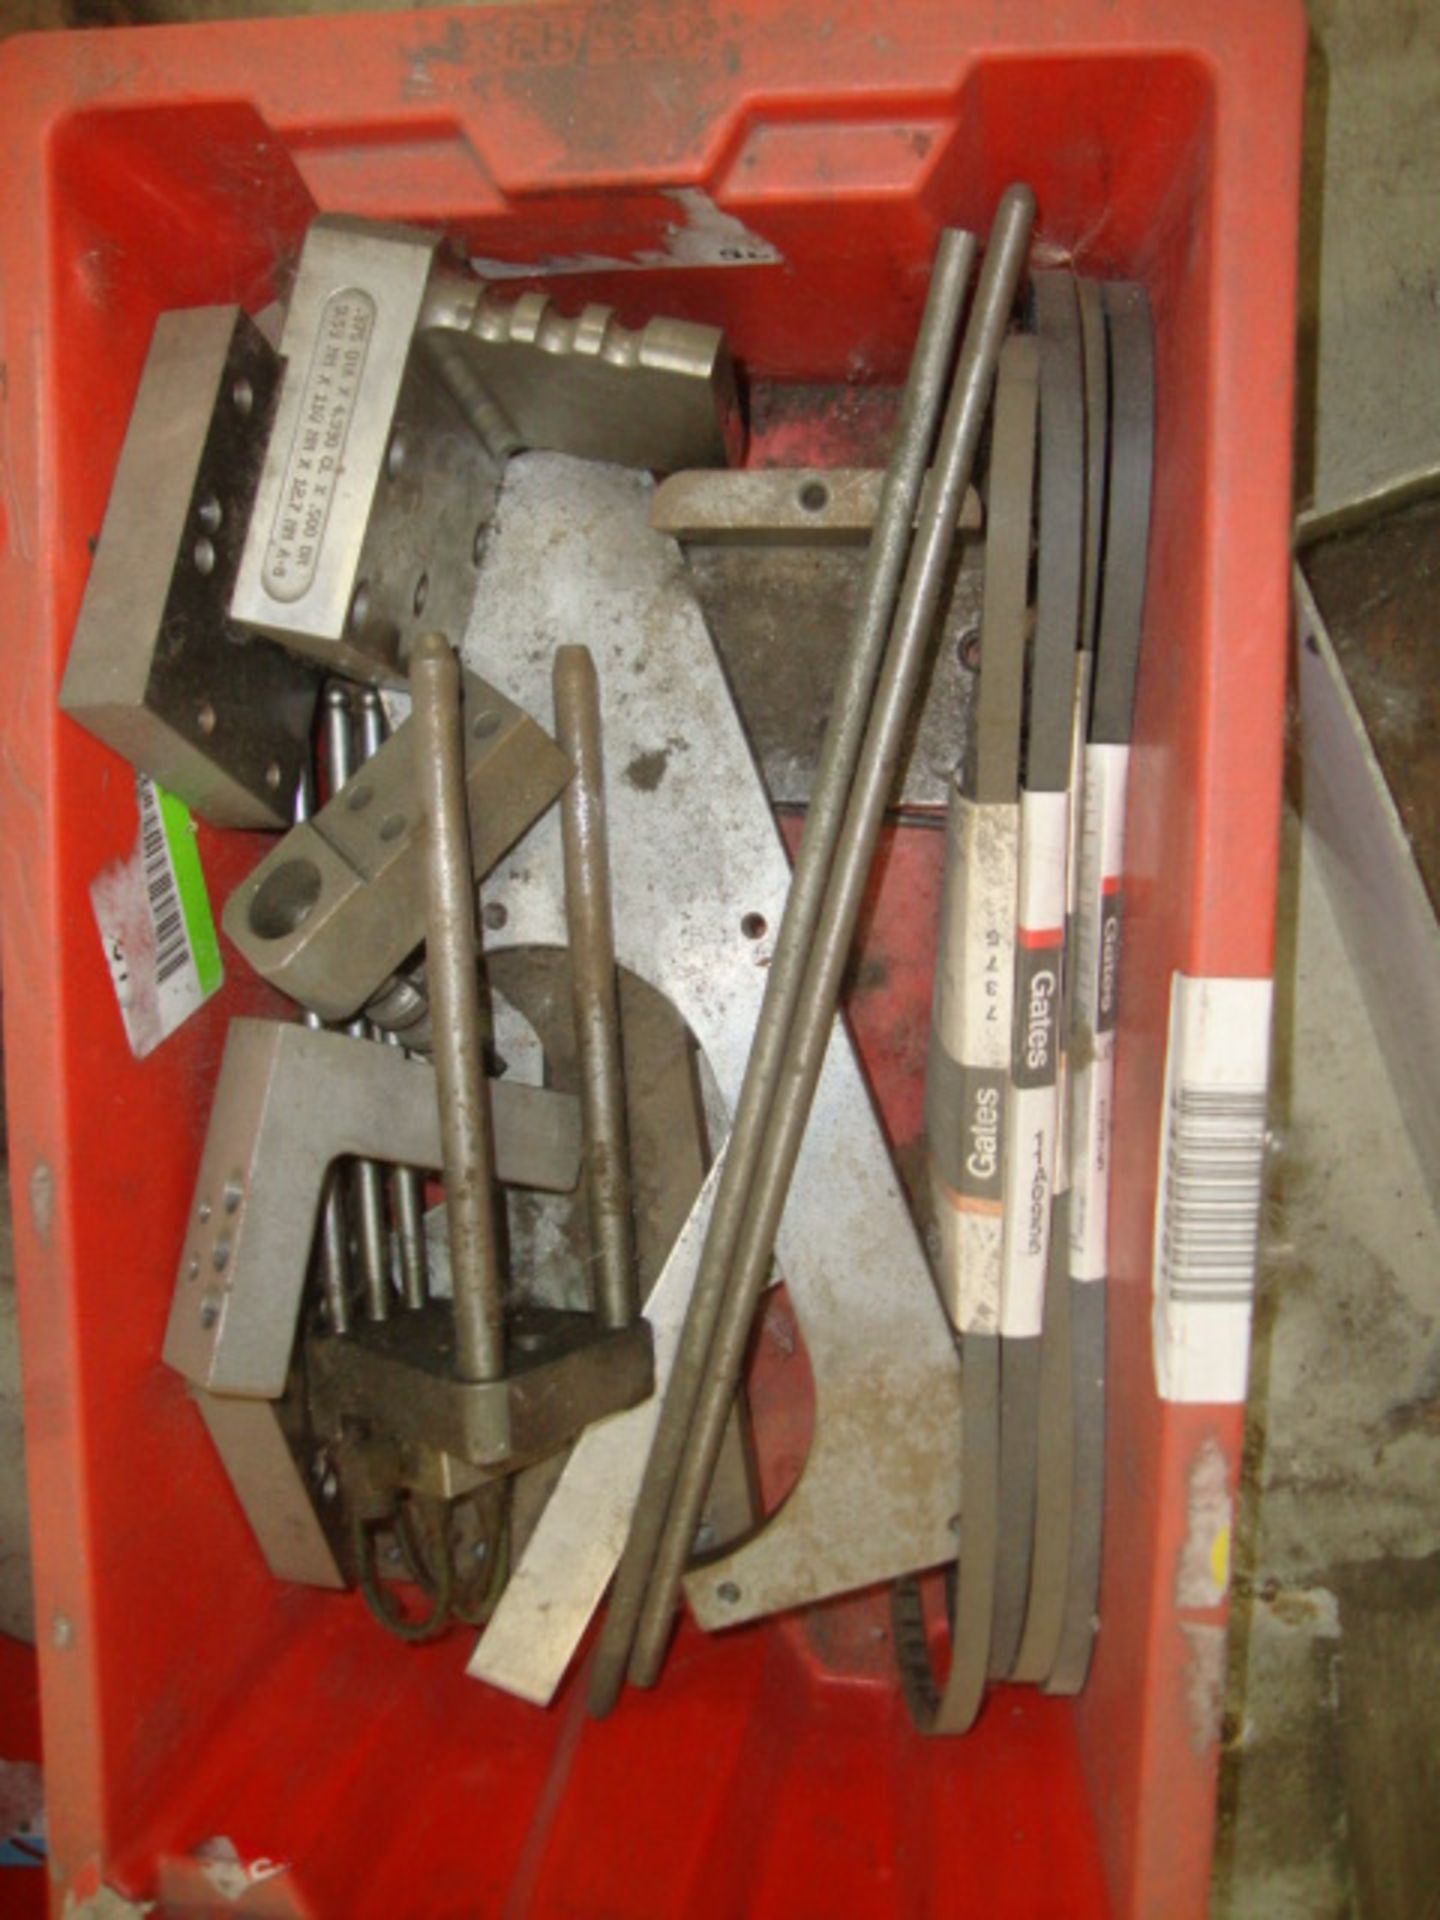 Vollmer Saw Blade Sharpener, approx. 36" x 24" x 68" tall, 220/440V - Image 5 of 5